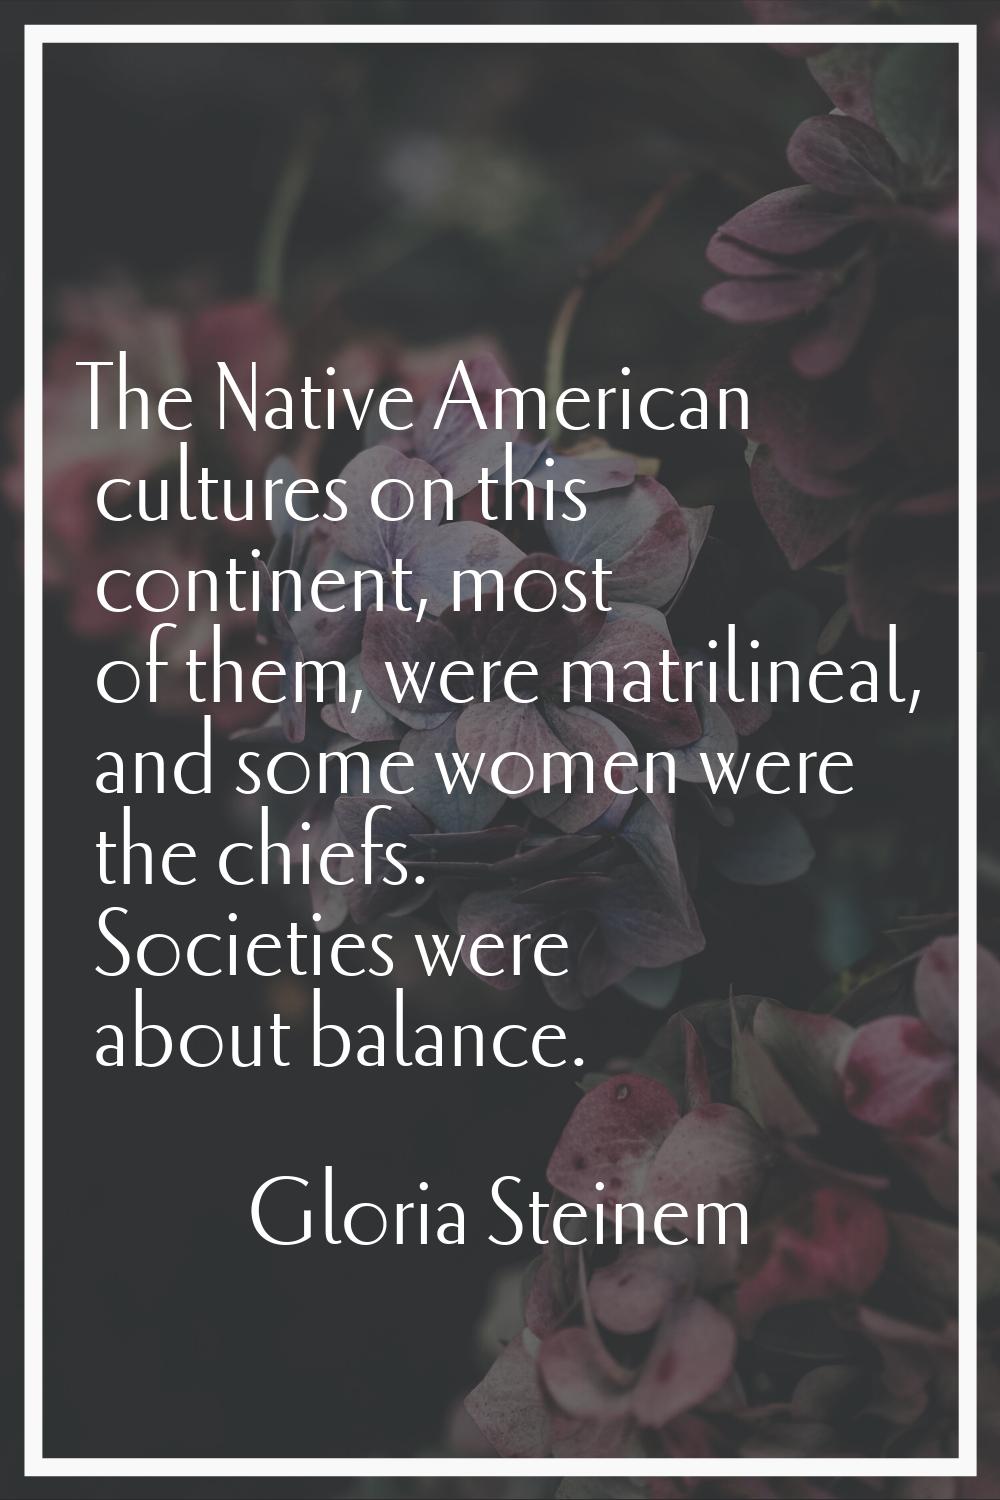 The Native American cultures on this continent, most of them, were matrilineal, and some women were